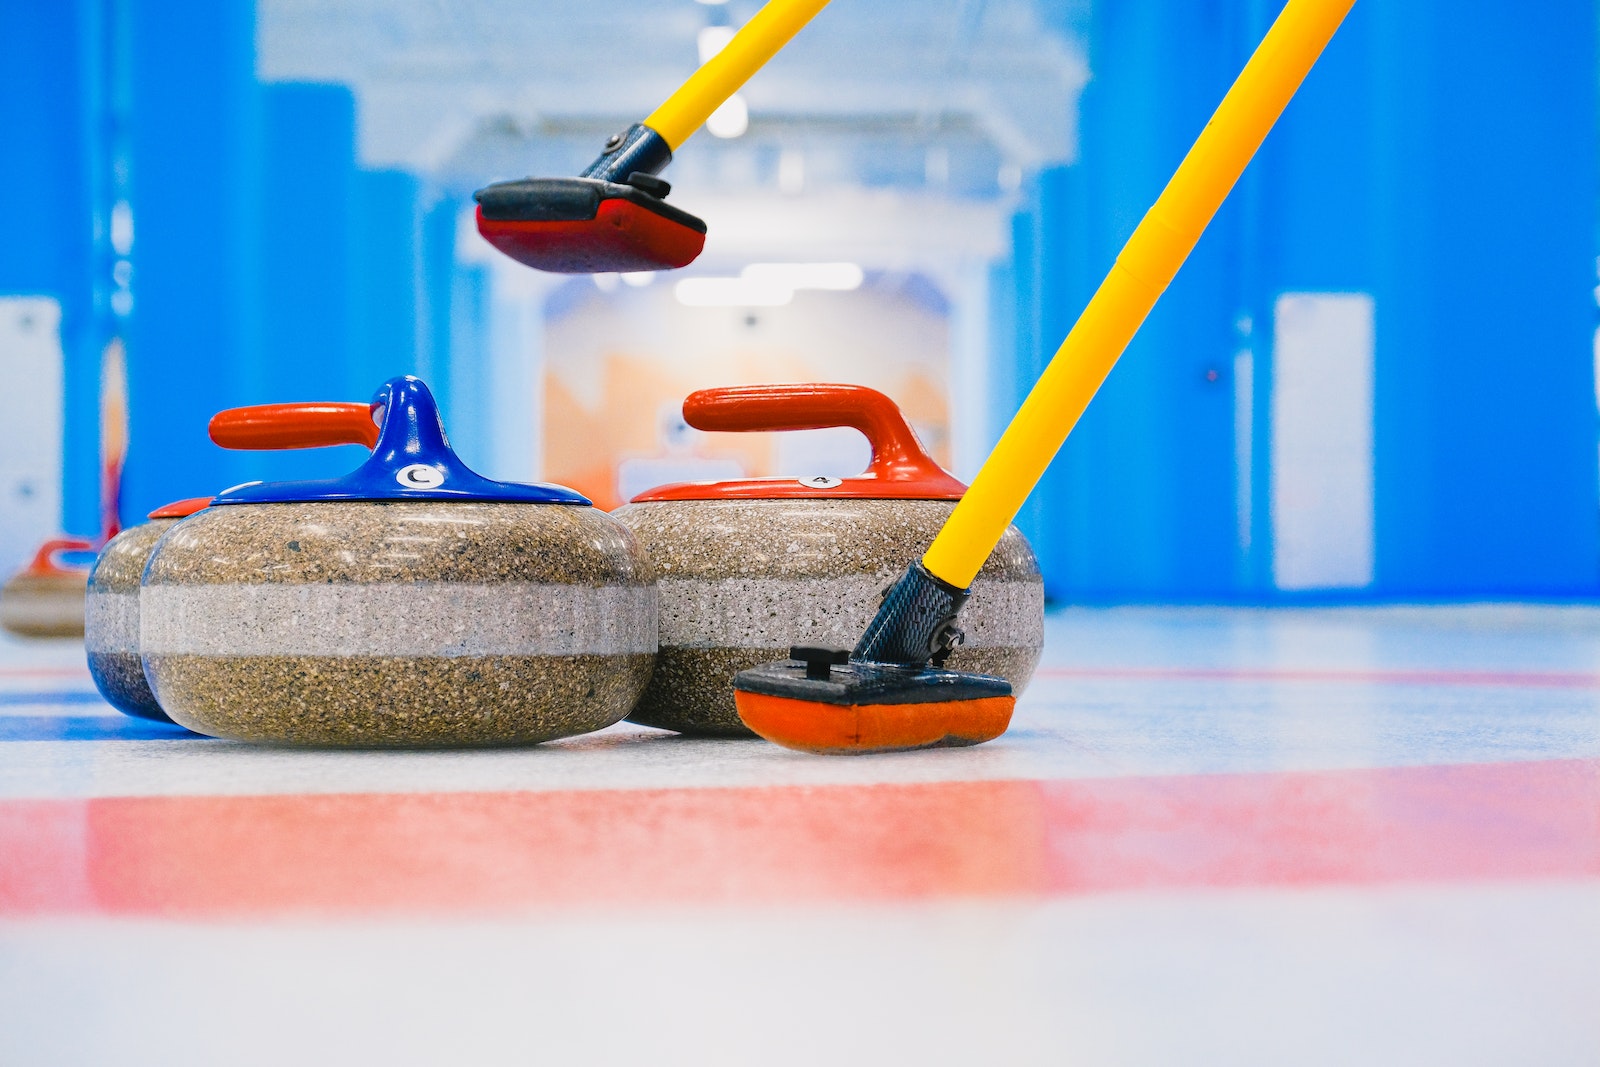 Granite curling stones with handles and long brooms placed on circular target area on ice sheet in arena with blue columns